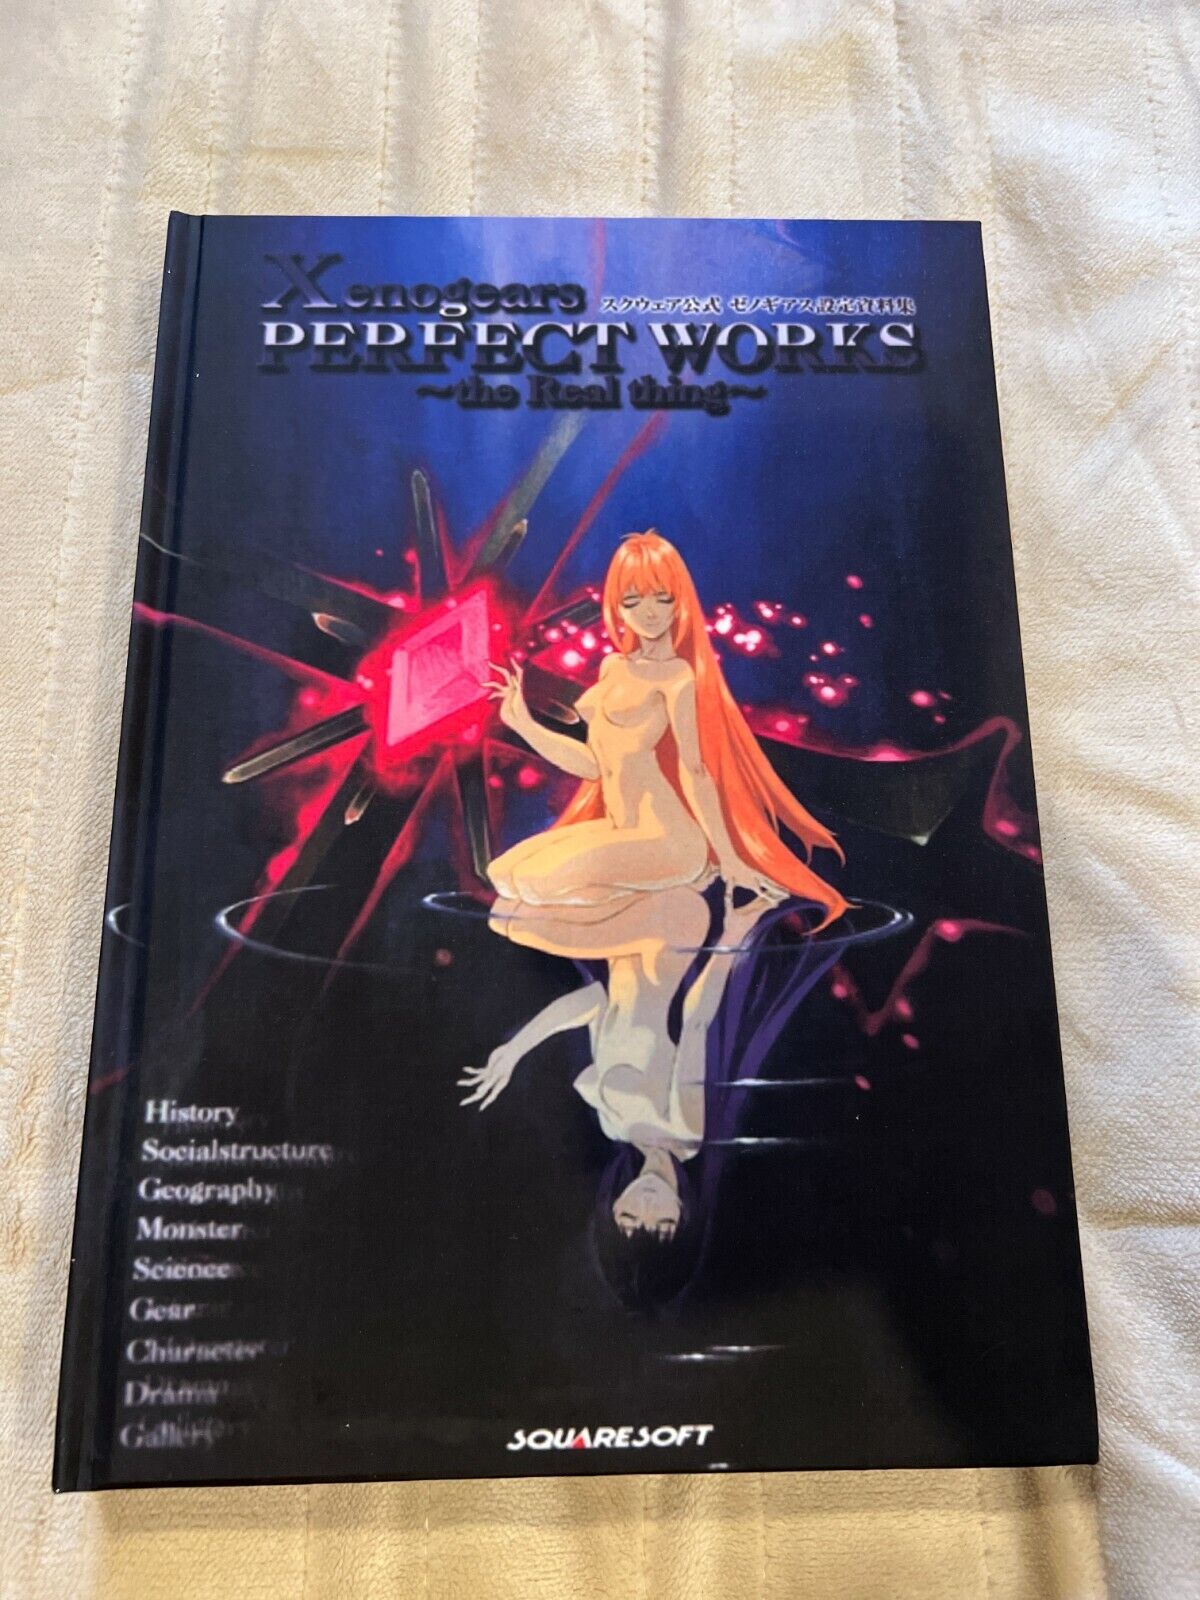 ENGLISH Xenogears PERFECT WORKS the Real thing Official Art Book Square Setting